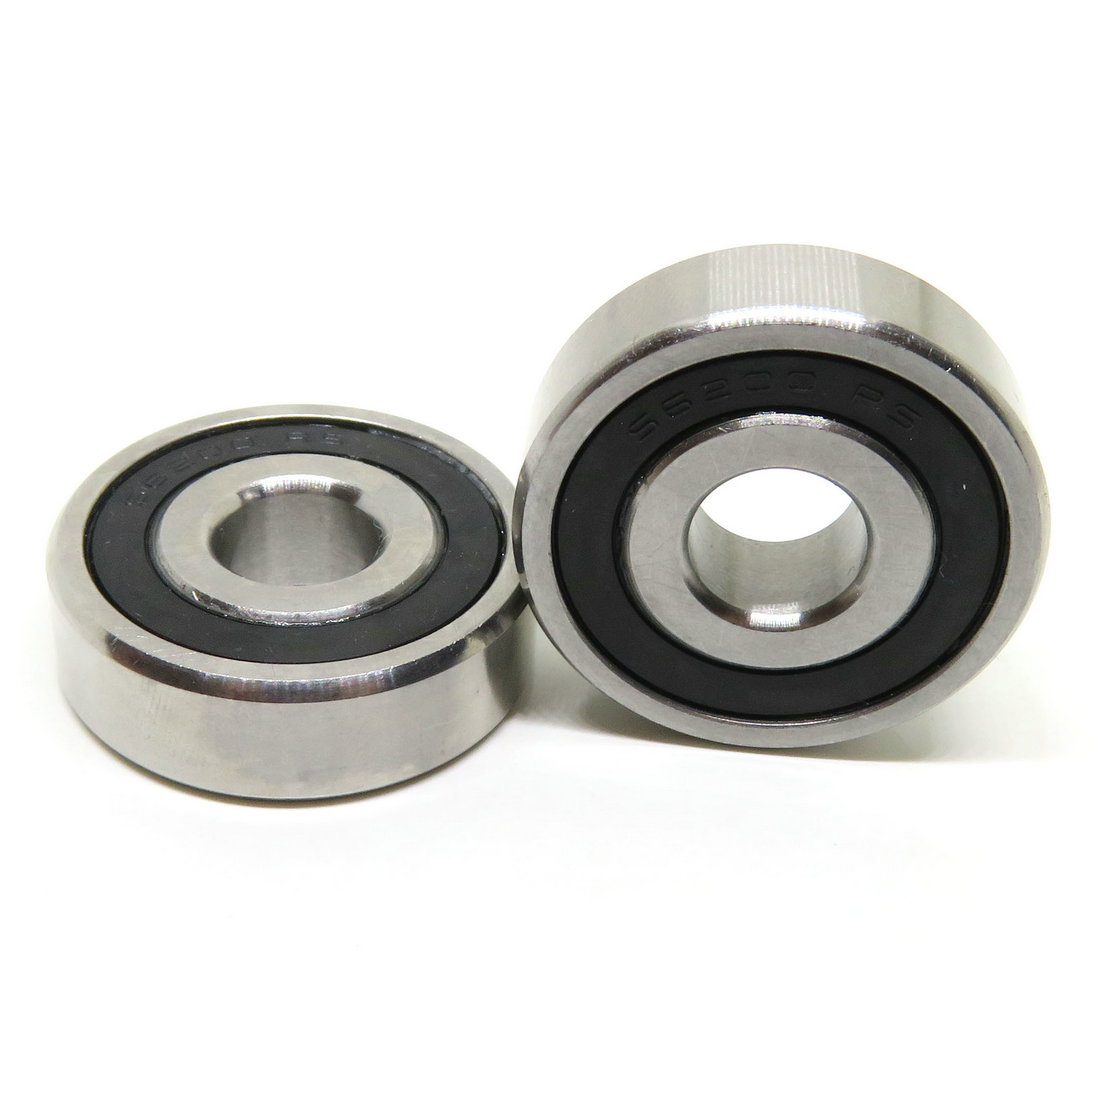 High Performance Stainless Steel Ball Bearing S6311RS 55x120x29mm For Marine Applications.jpg